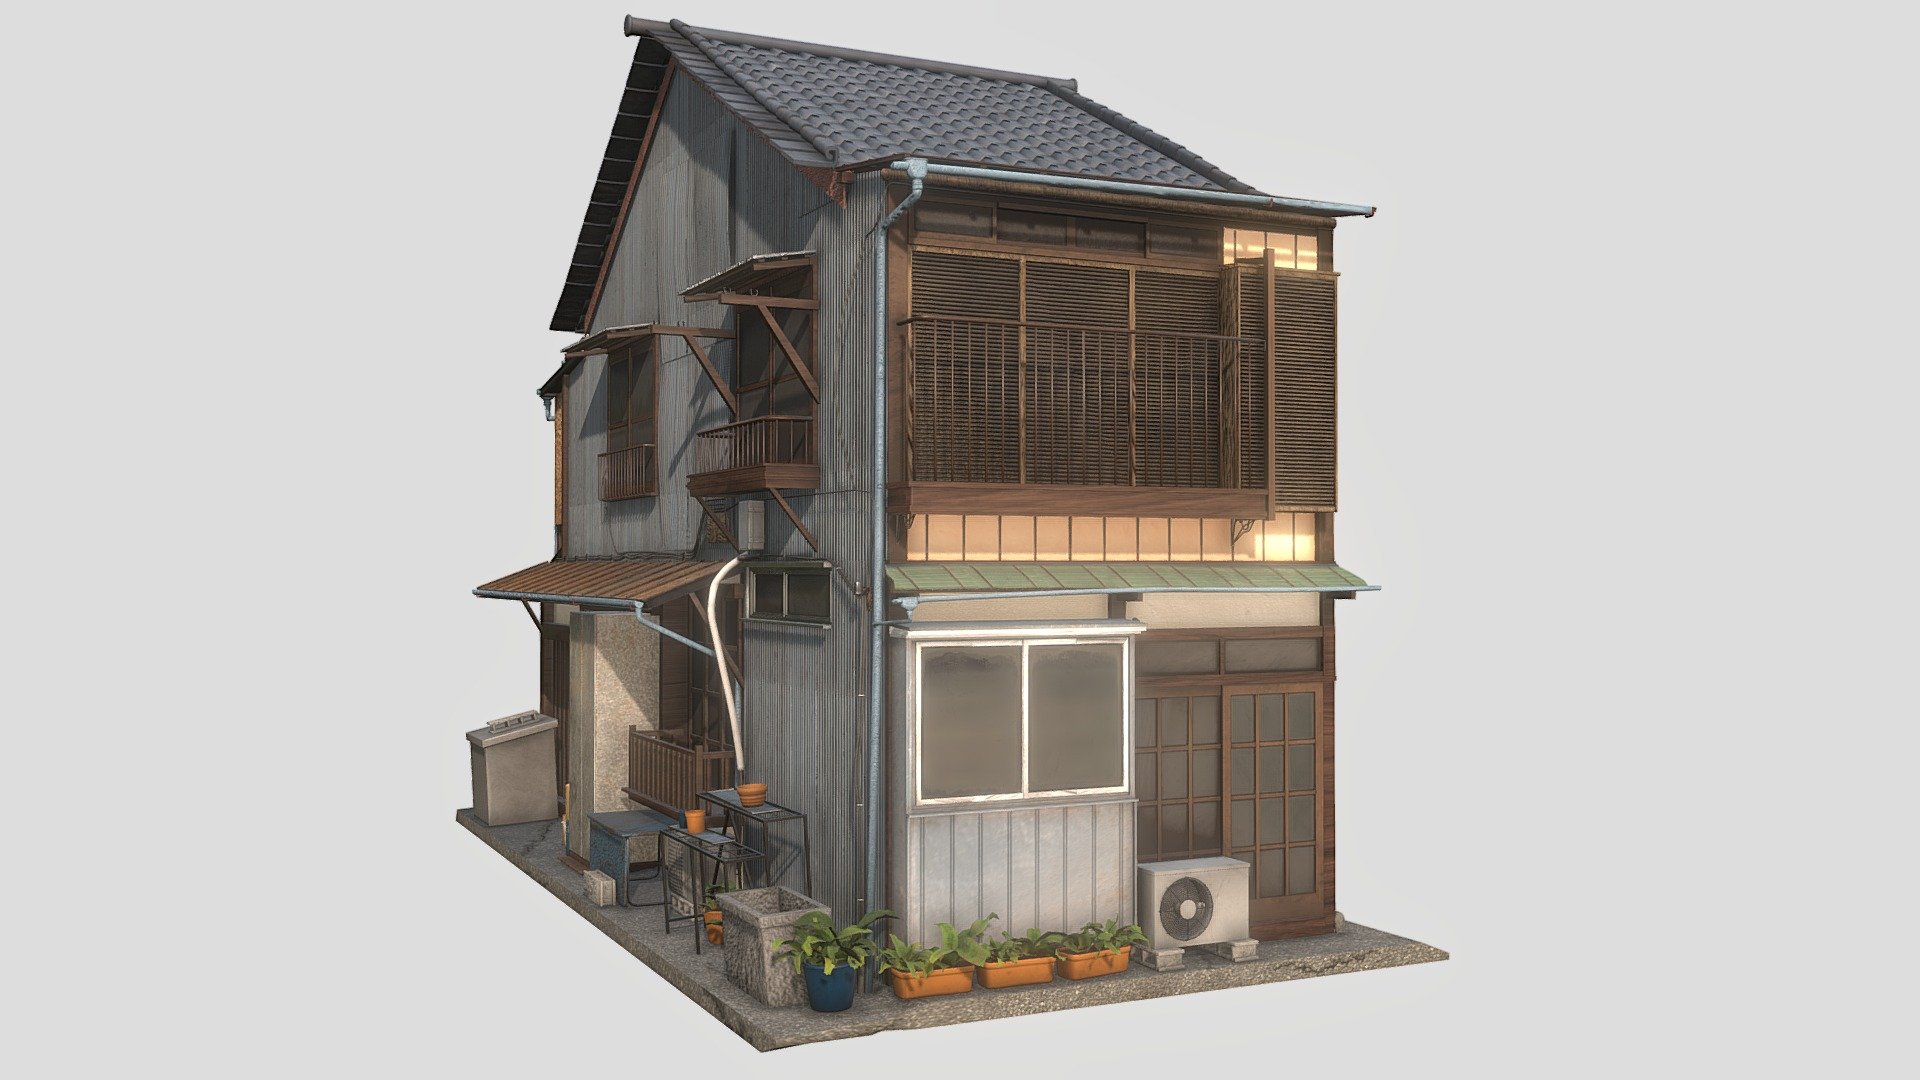 Tokyo Suburban Rustic House, a japanese house model i made from pictures i took during my trip to Japan.

The entire scene contains 1 material with a single 8K texture.
The plants in the scene are sourced from polyhaven.com

Real house: https://goo.gl/maps/jJ33hWqRs89JYwHu7 - Tokyo Suburban Rustic House - Buy Royalty Free 3D model by Gianluca Gatto (@shockproof) 3d model